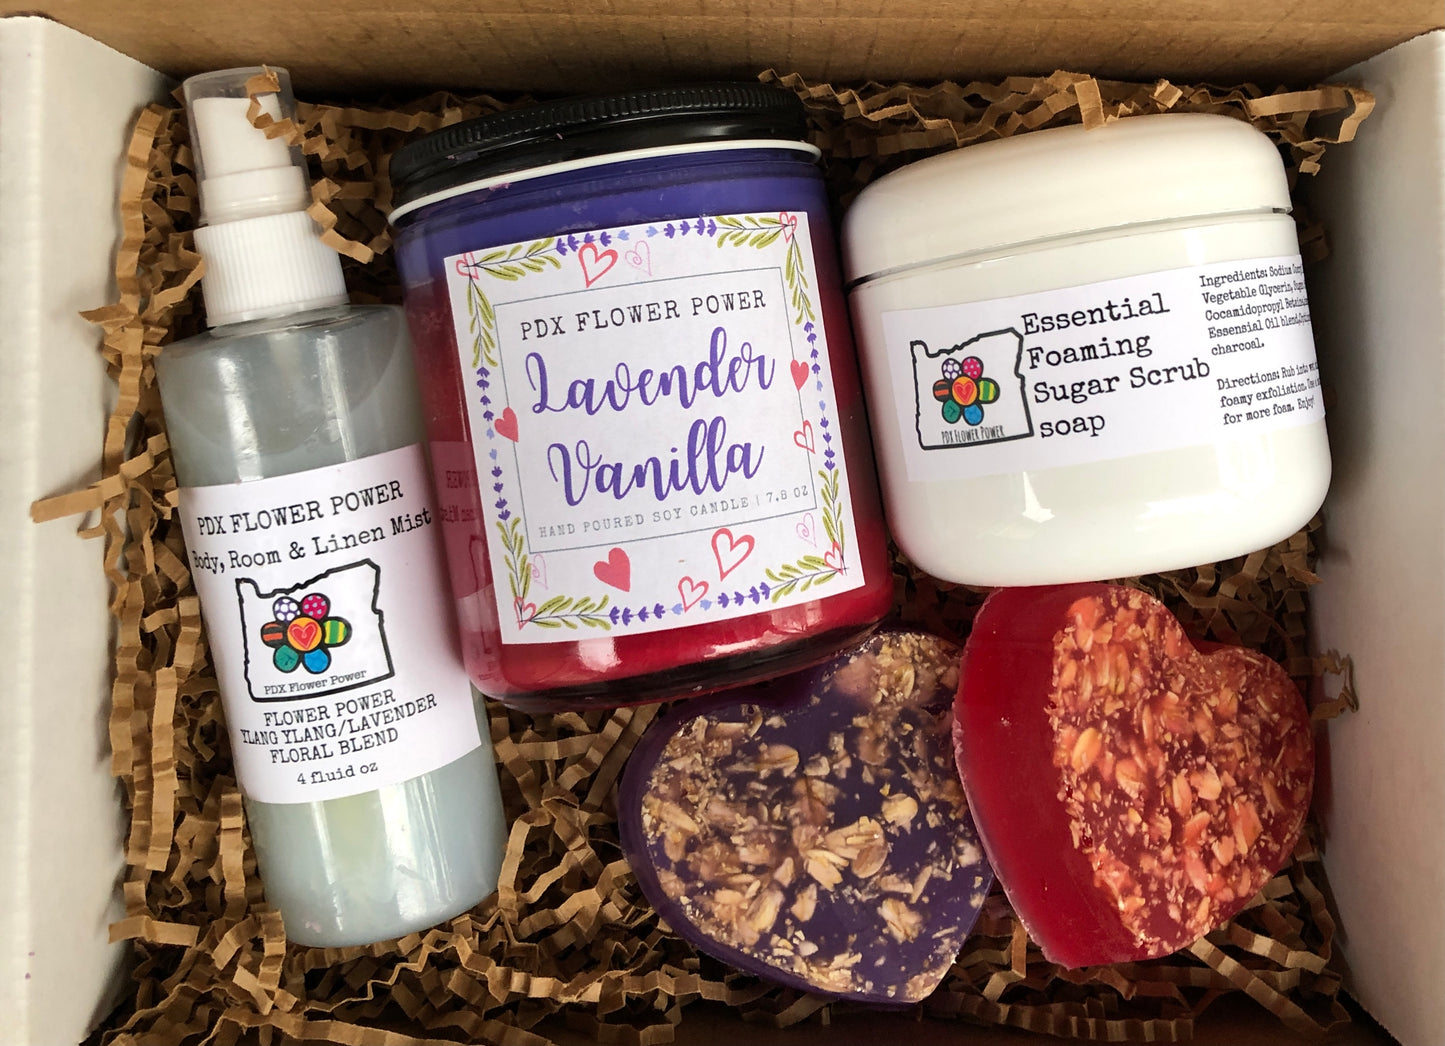 PDX Flower Power "valentines Self-care" gift box